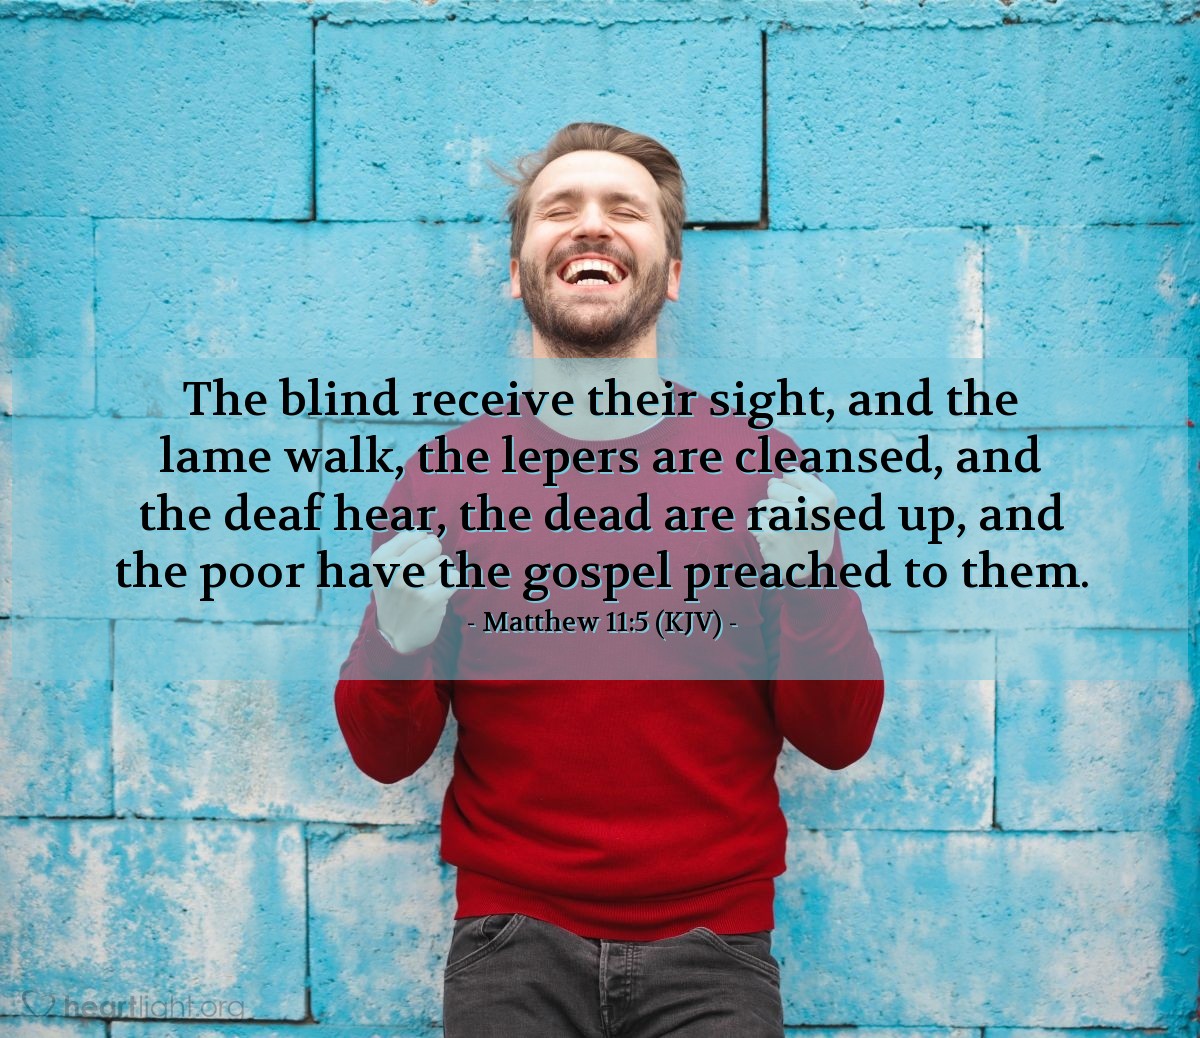 Illustration of Matthew 11:5 (KJV) — The blind receive their sight, and the lame walk, the lepers are cleansed, and the deaf hear, the dead are raised up, and the poor have the gospel preached to them.